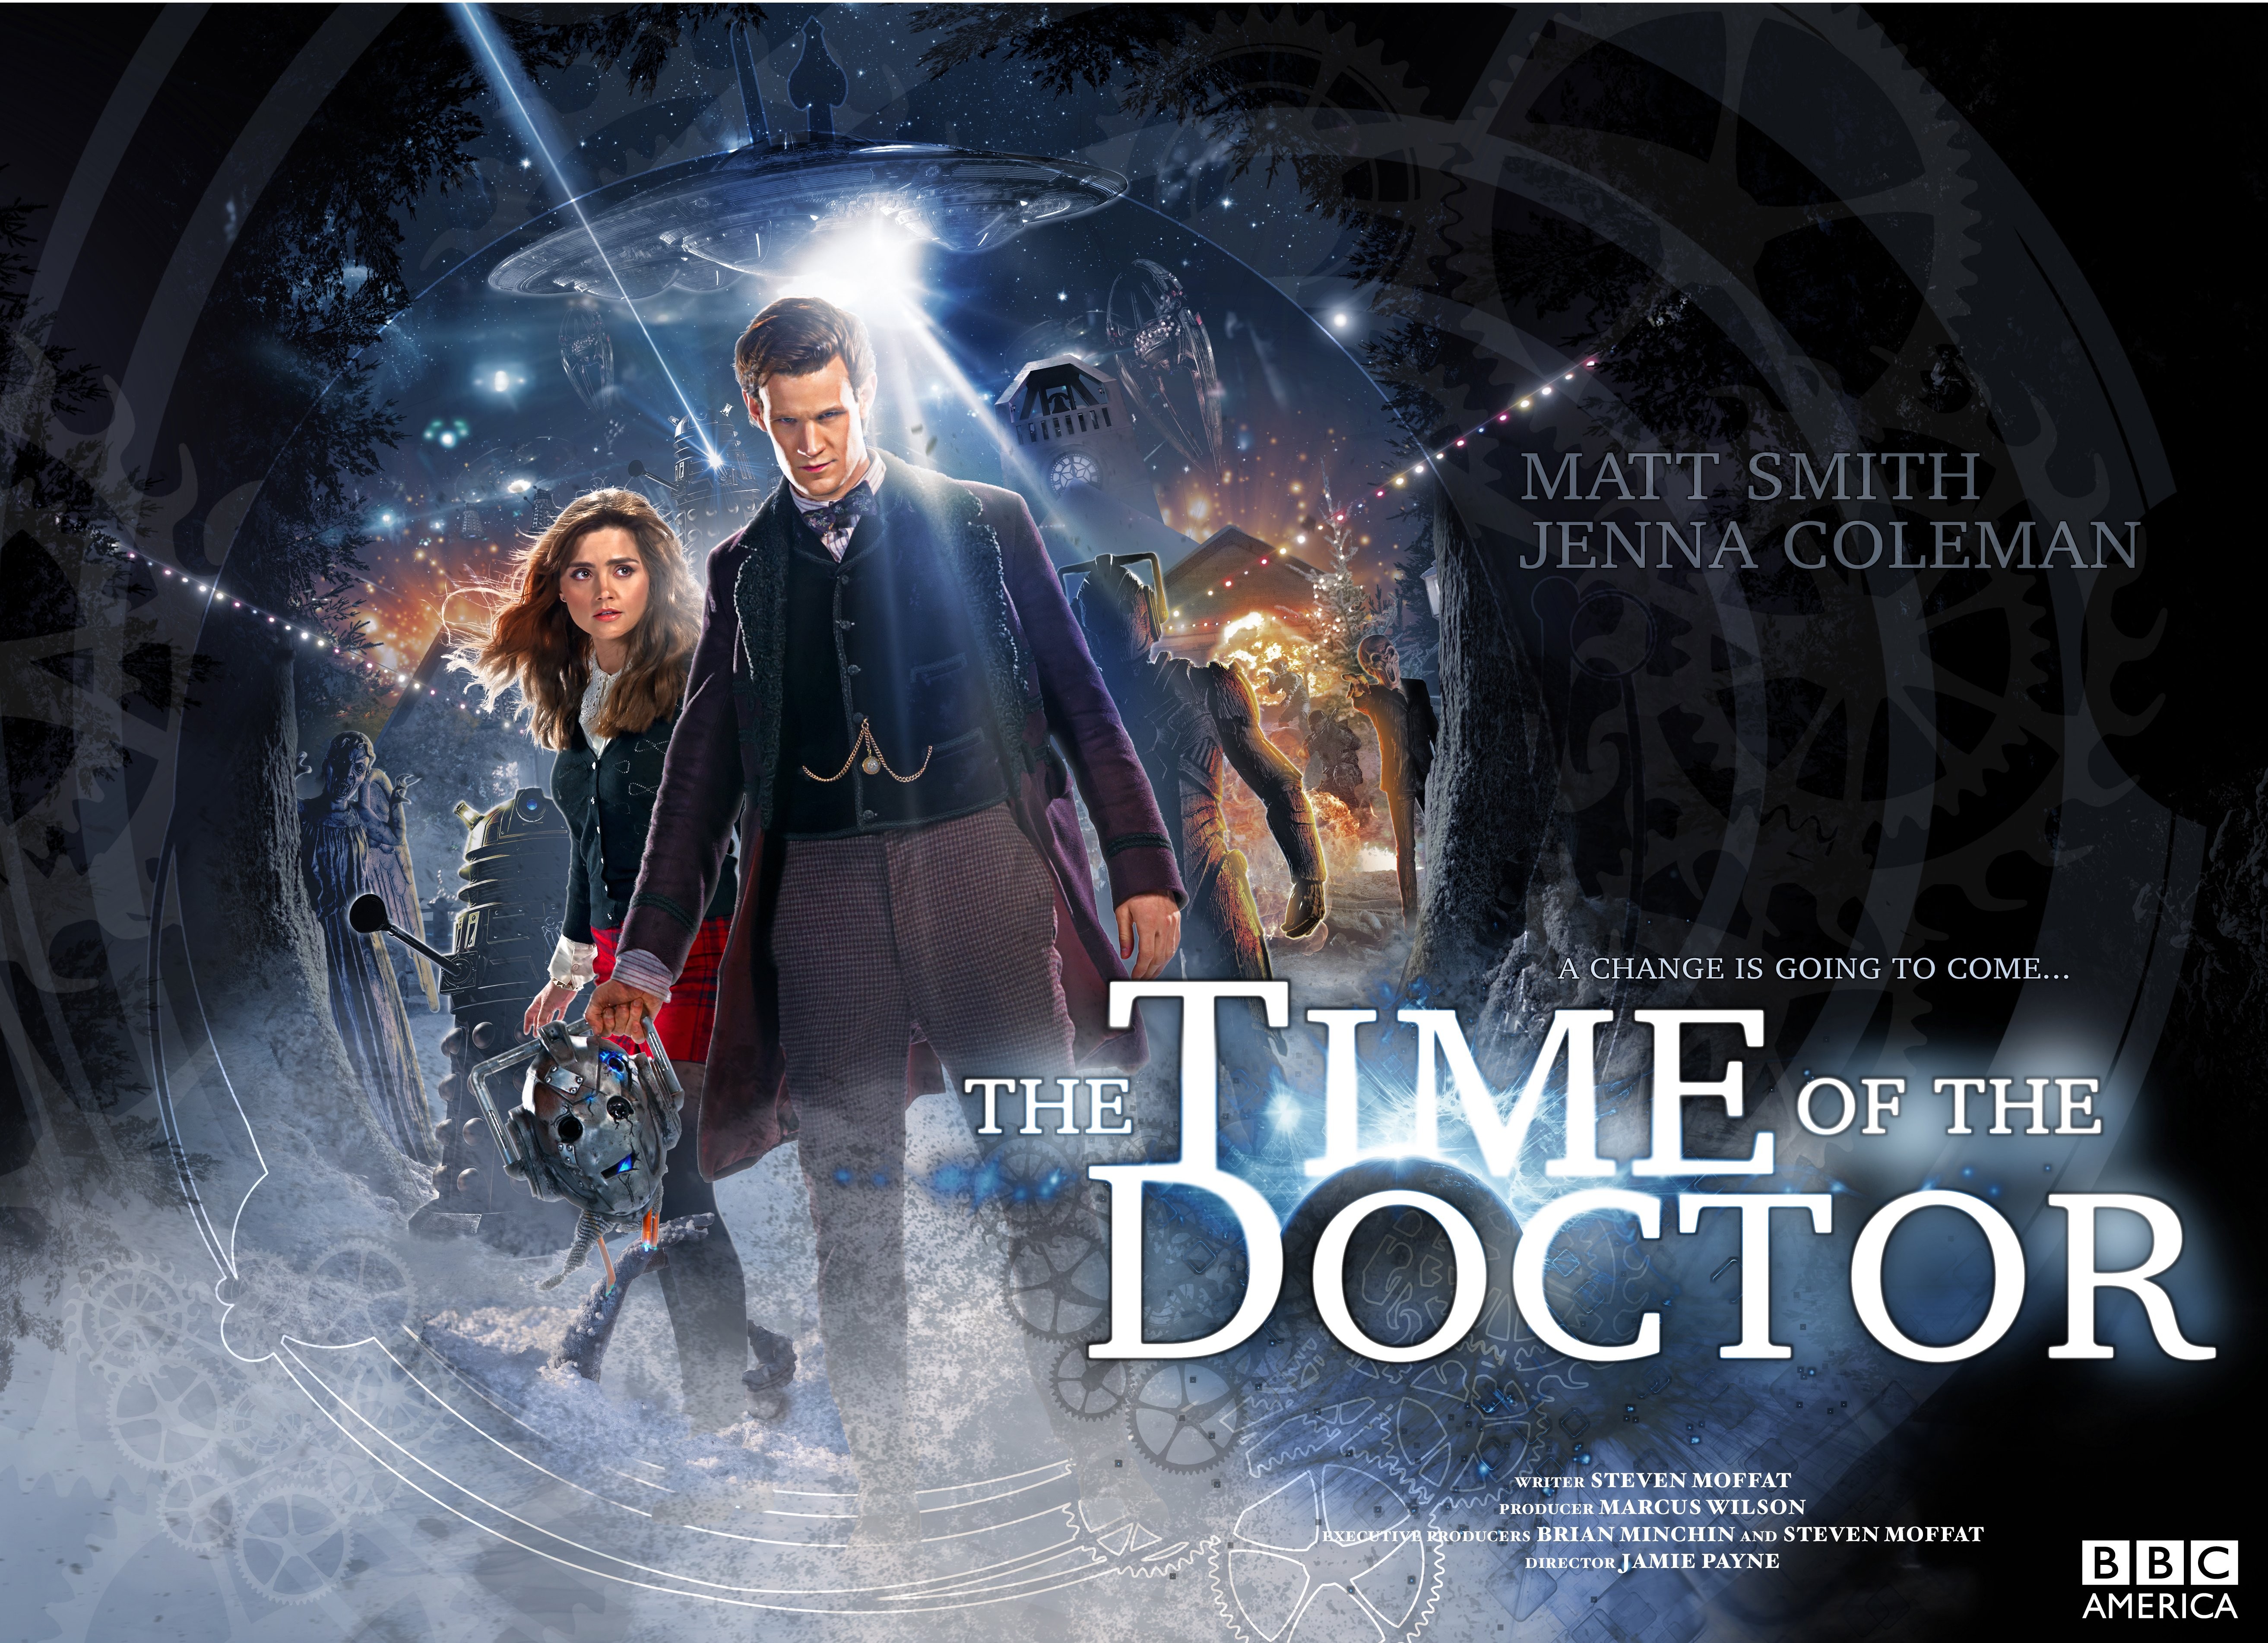 Doctor Who Matt Smith The Doctor Eleventh Doctor Jenna Louise Coleman Clara Oswald BBC TV Tv Series 5252x3805